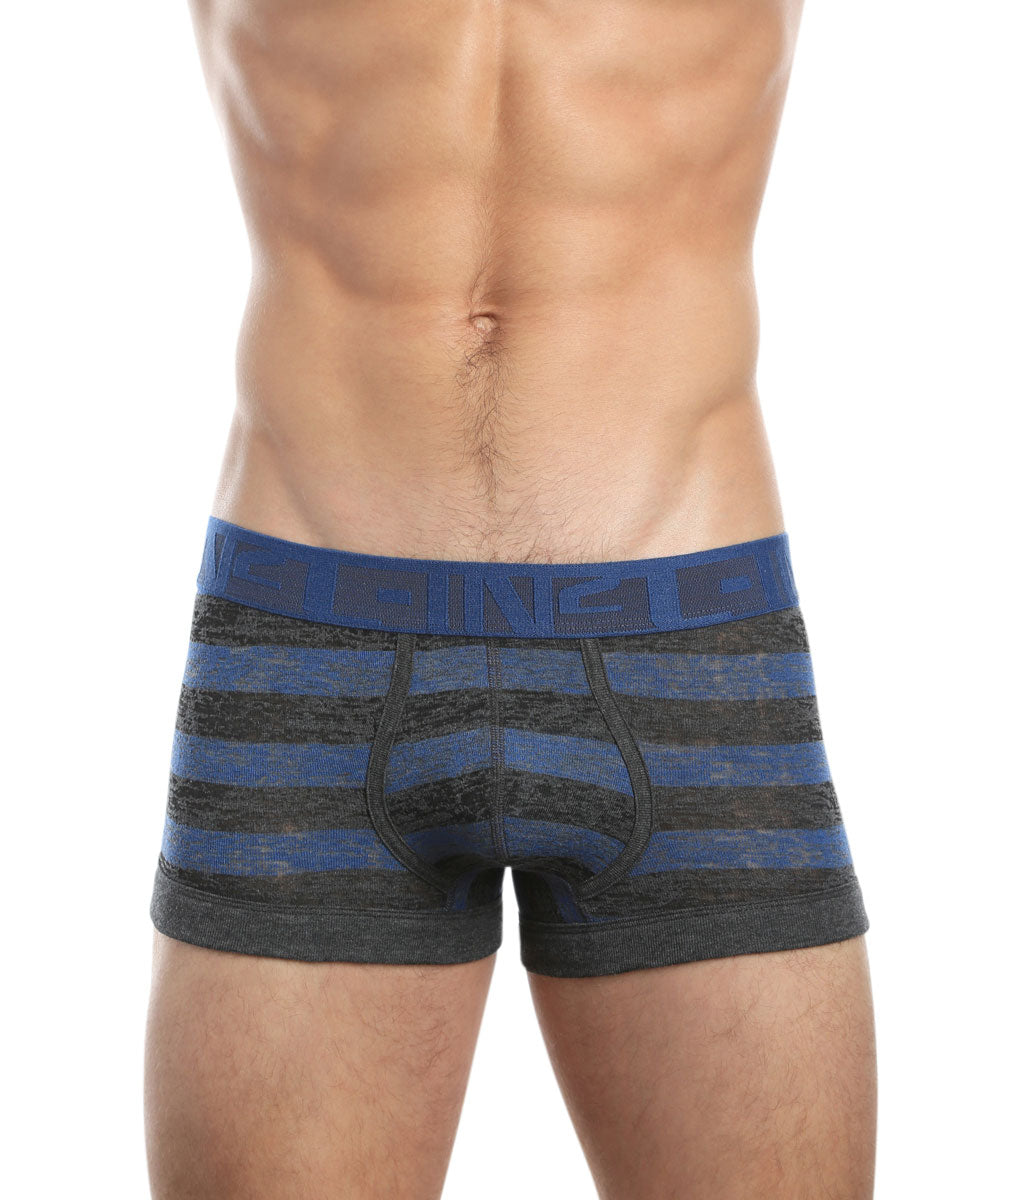 Caution Fly Front Trunk Tom Navy – C-IN2 New York